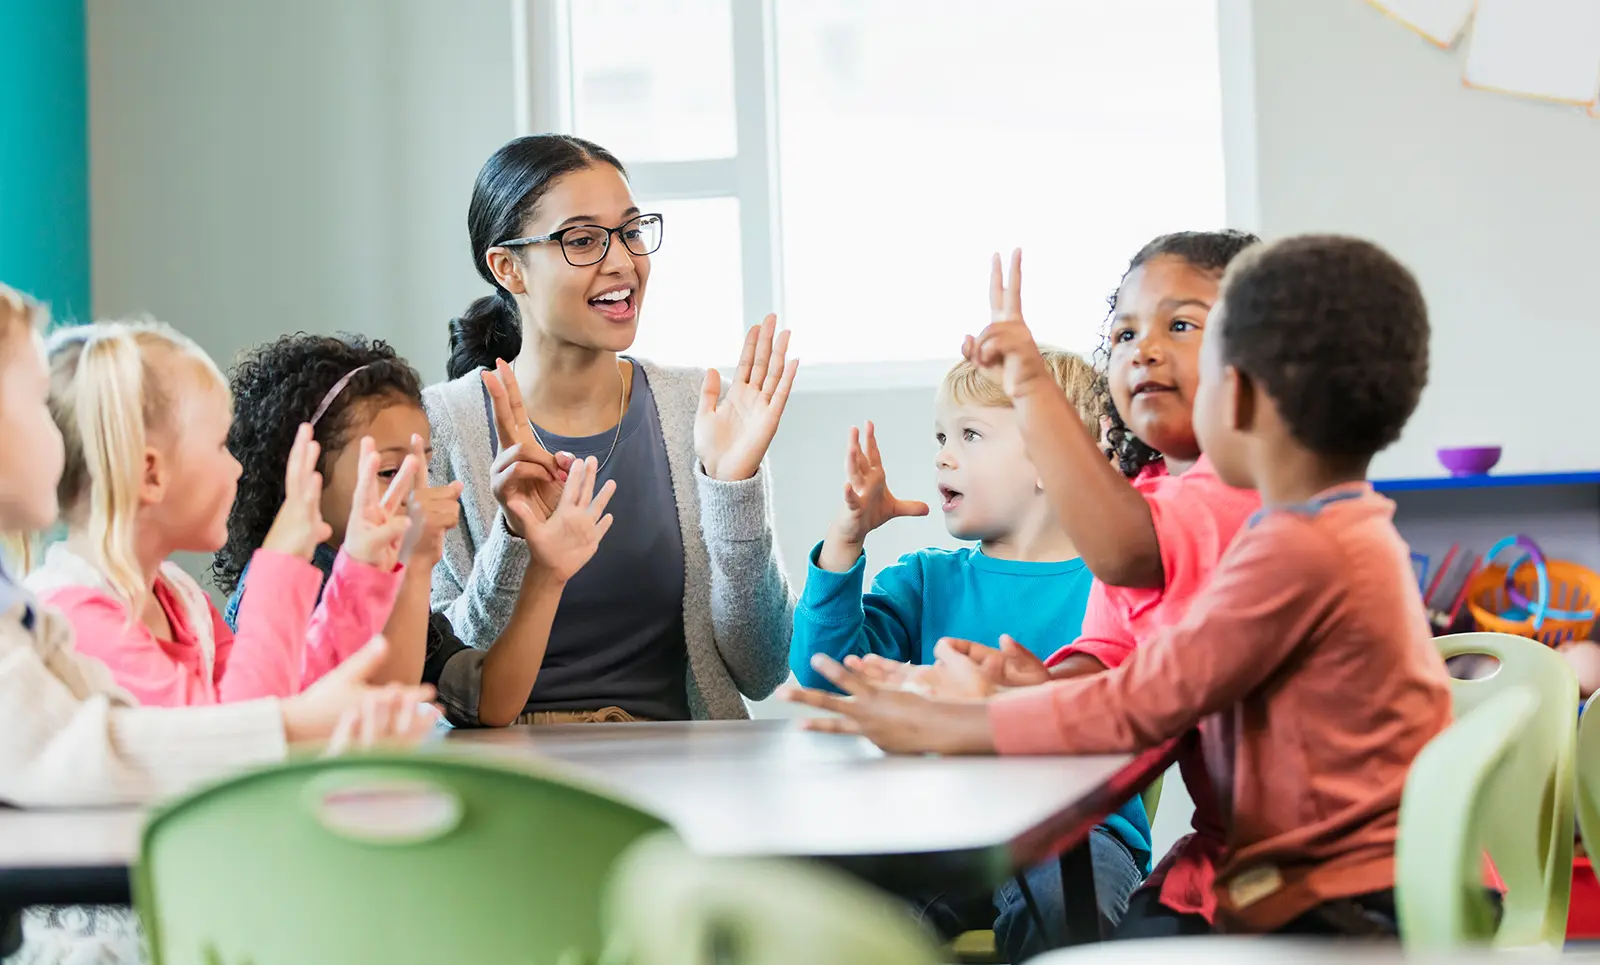 Teacher and six children sitting at school table talking with hands held out